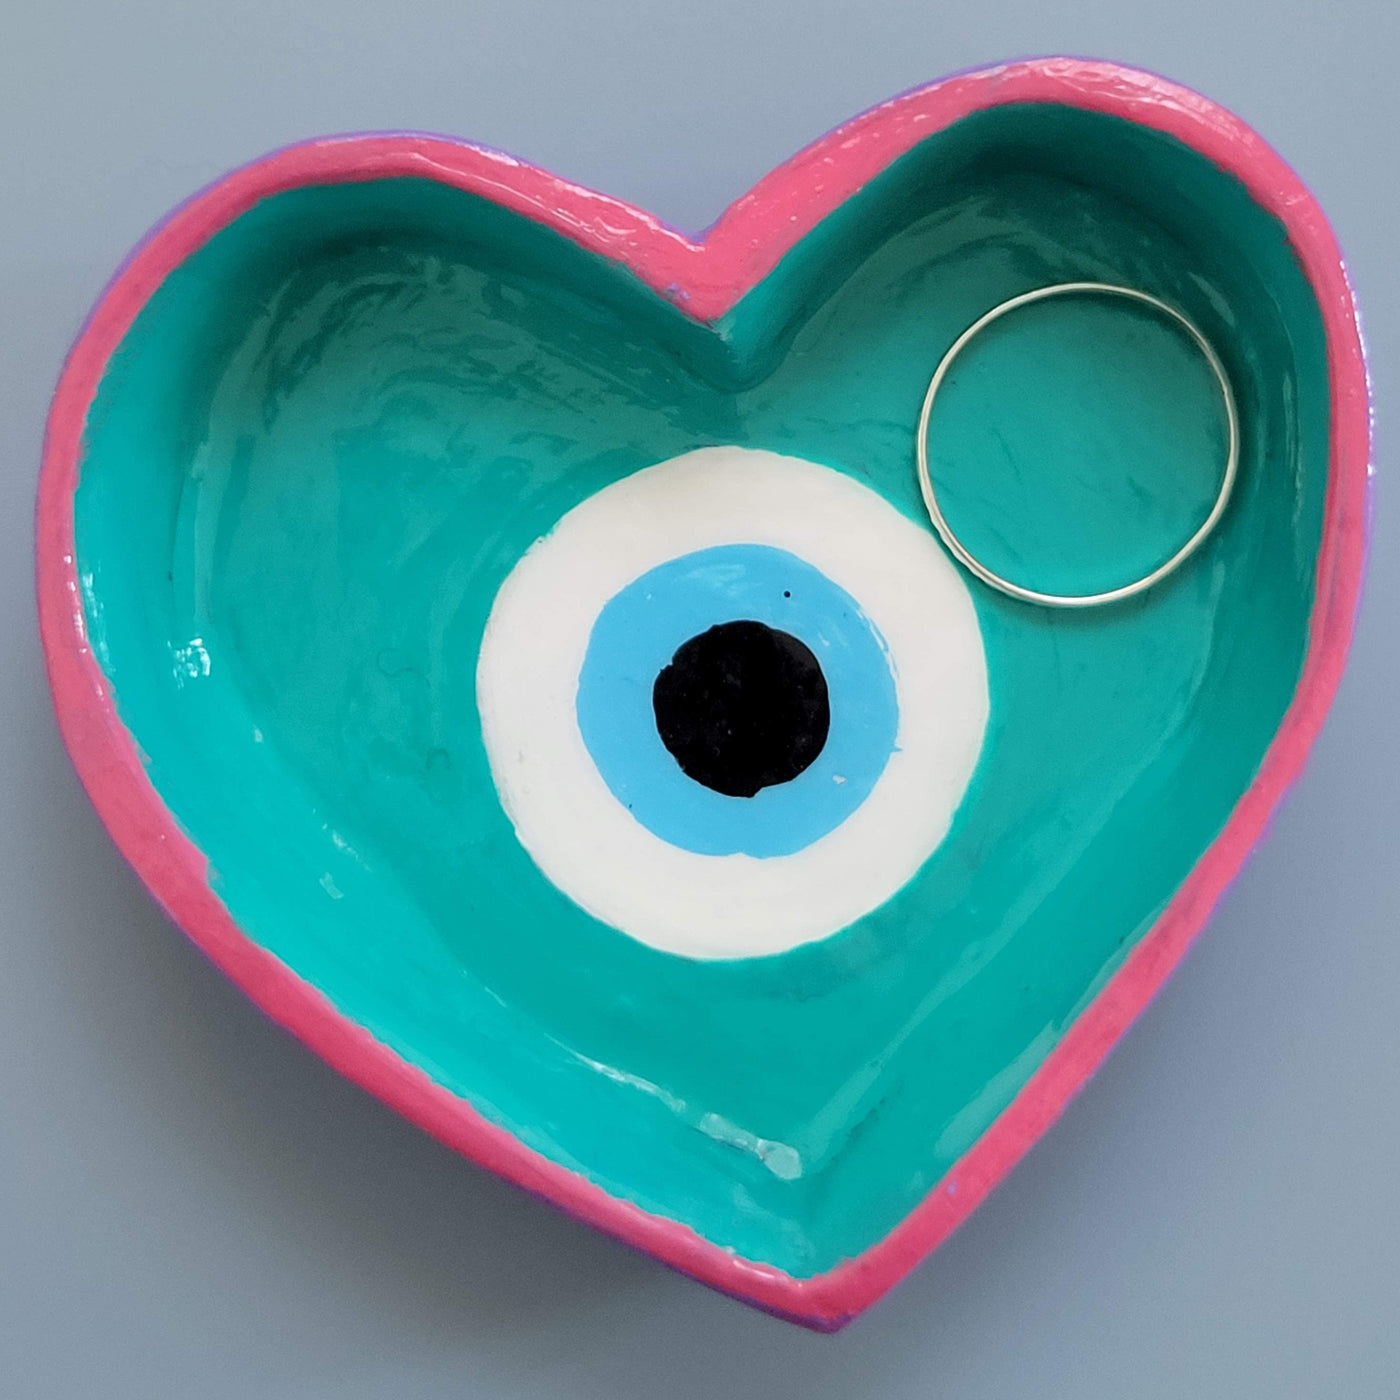 Evil eye painted in a heart shaped ring dish with pink, teal, blue, black and white